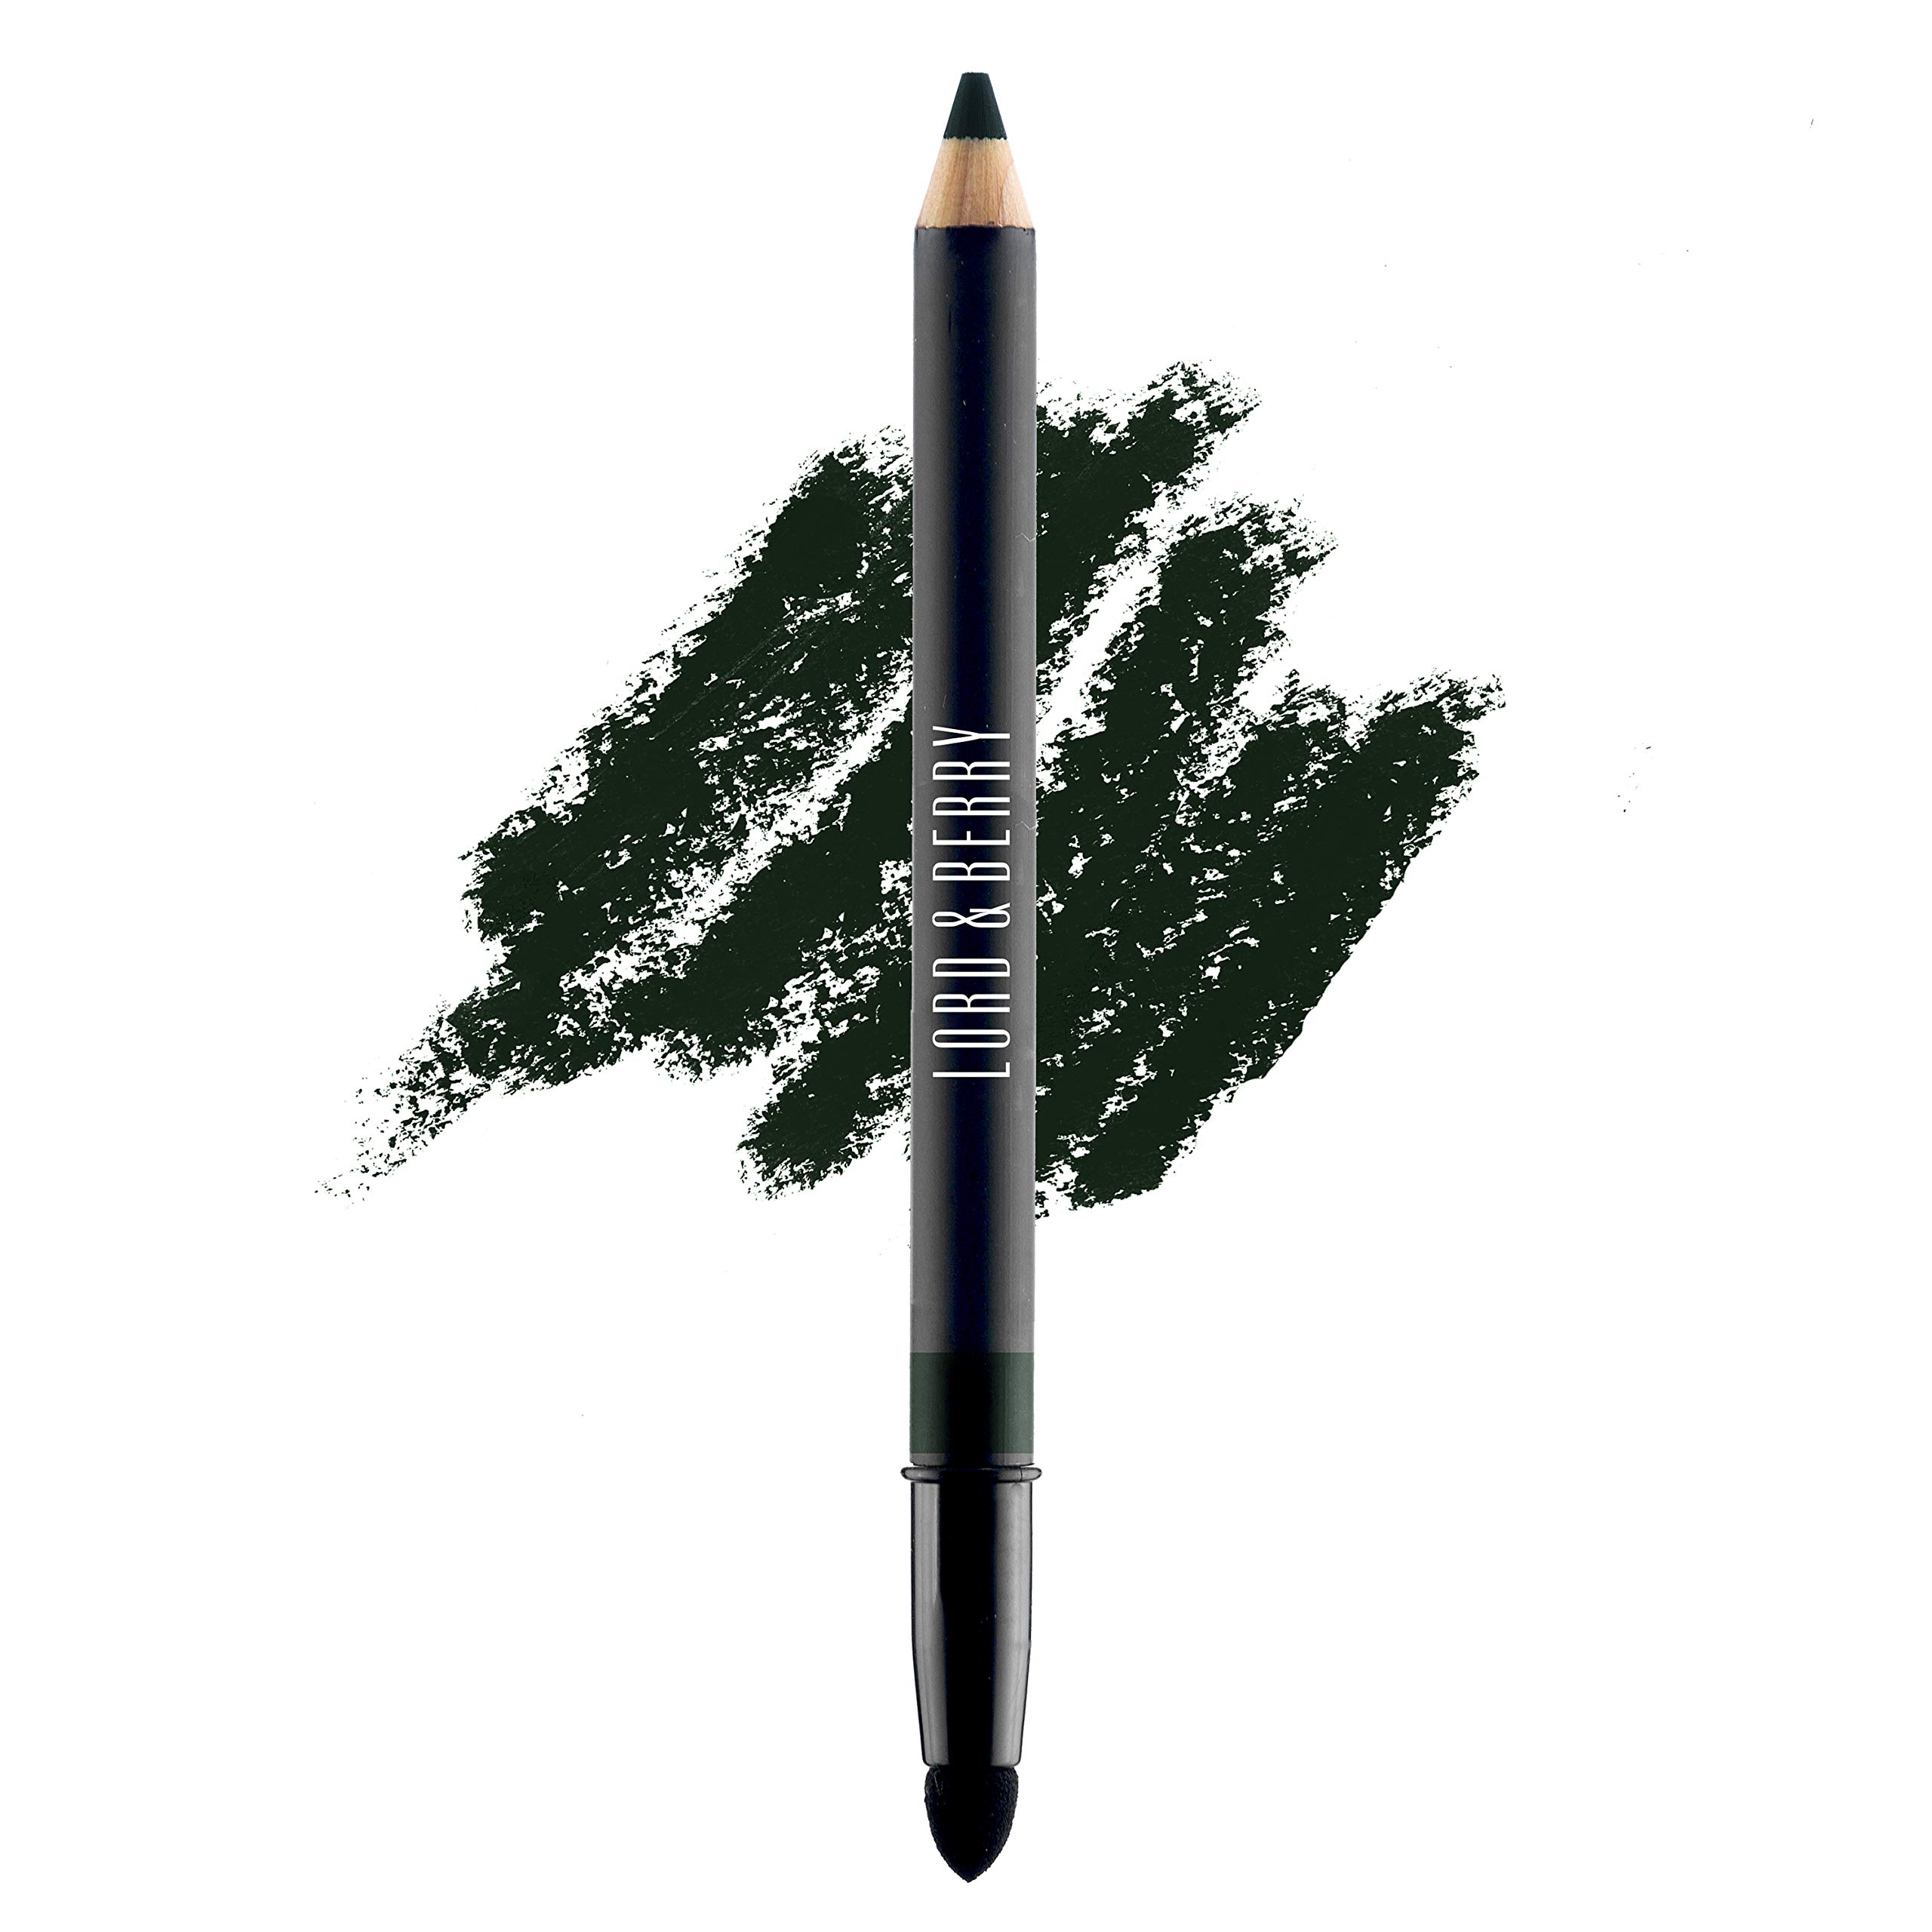 Lord & Berry VELLUTO - Powdery Smooth Shadow Eyeliner Pencil, Soft Smooth & Long Lasting Weightless Formula With Blending Tip Eye Liner - Easy To Use Eye Makeup